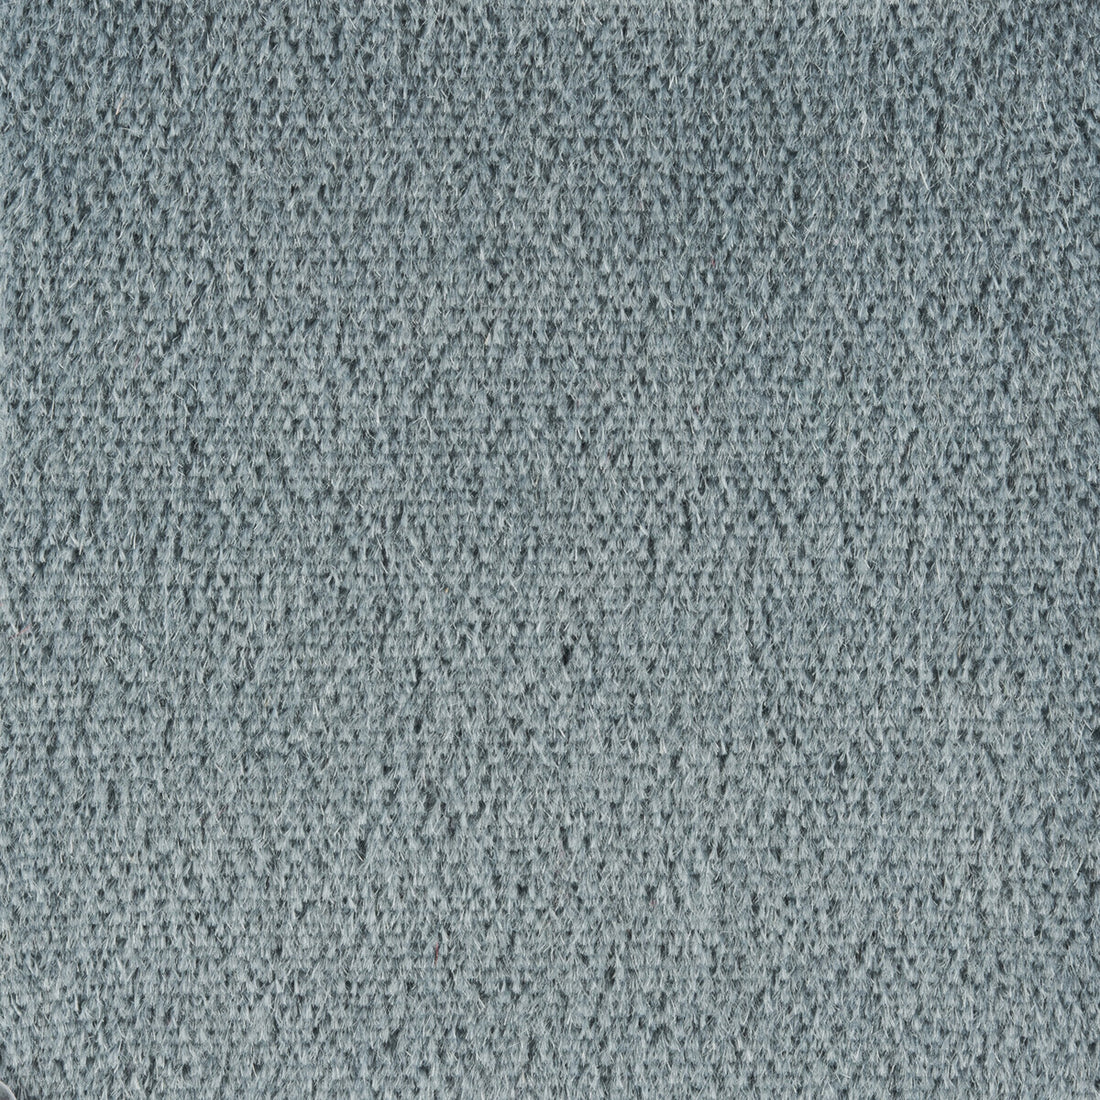 Plazzo Mohair fabric in sea color - pattern 34259.280.0 - by Kravet Couture